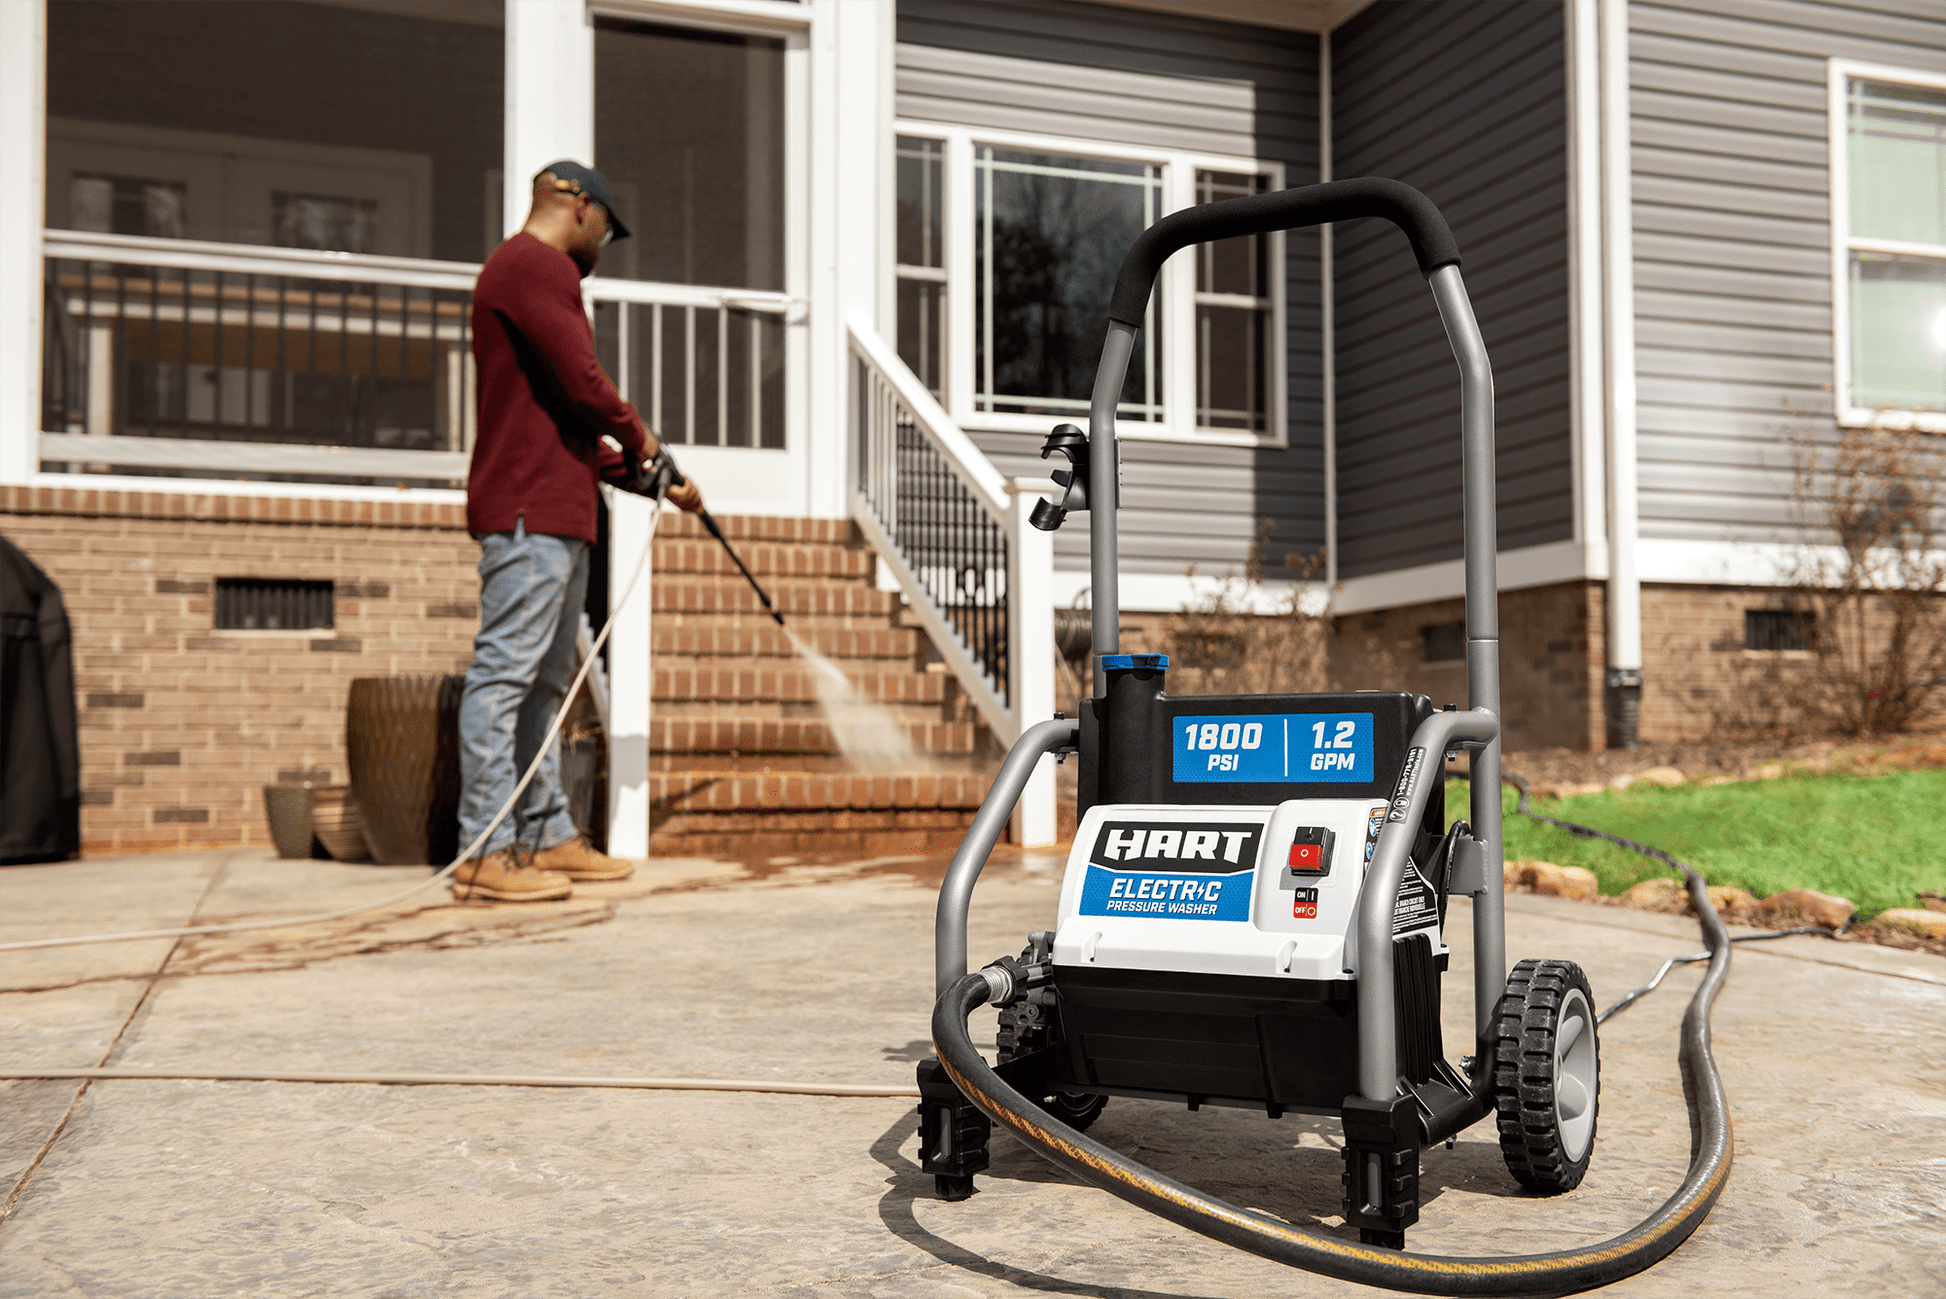 1800 PSI Electric Pressure Washer with Bonus 11" Surface Cleaner